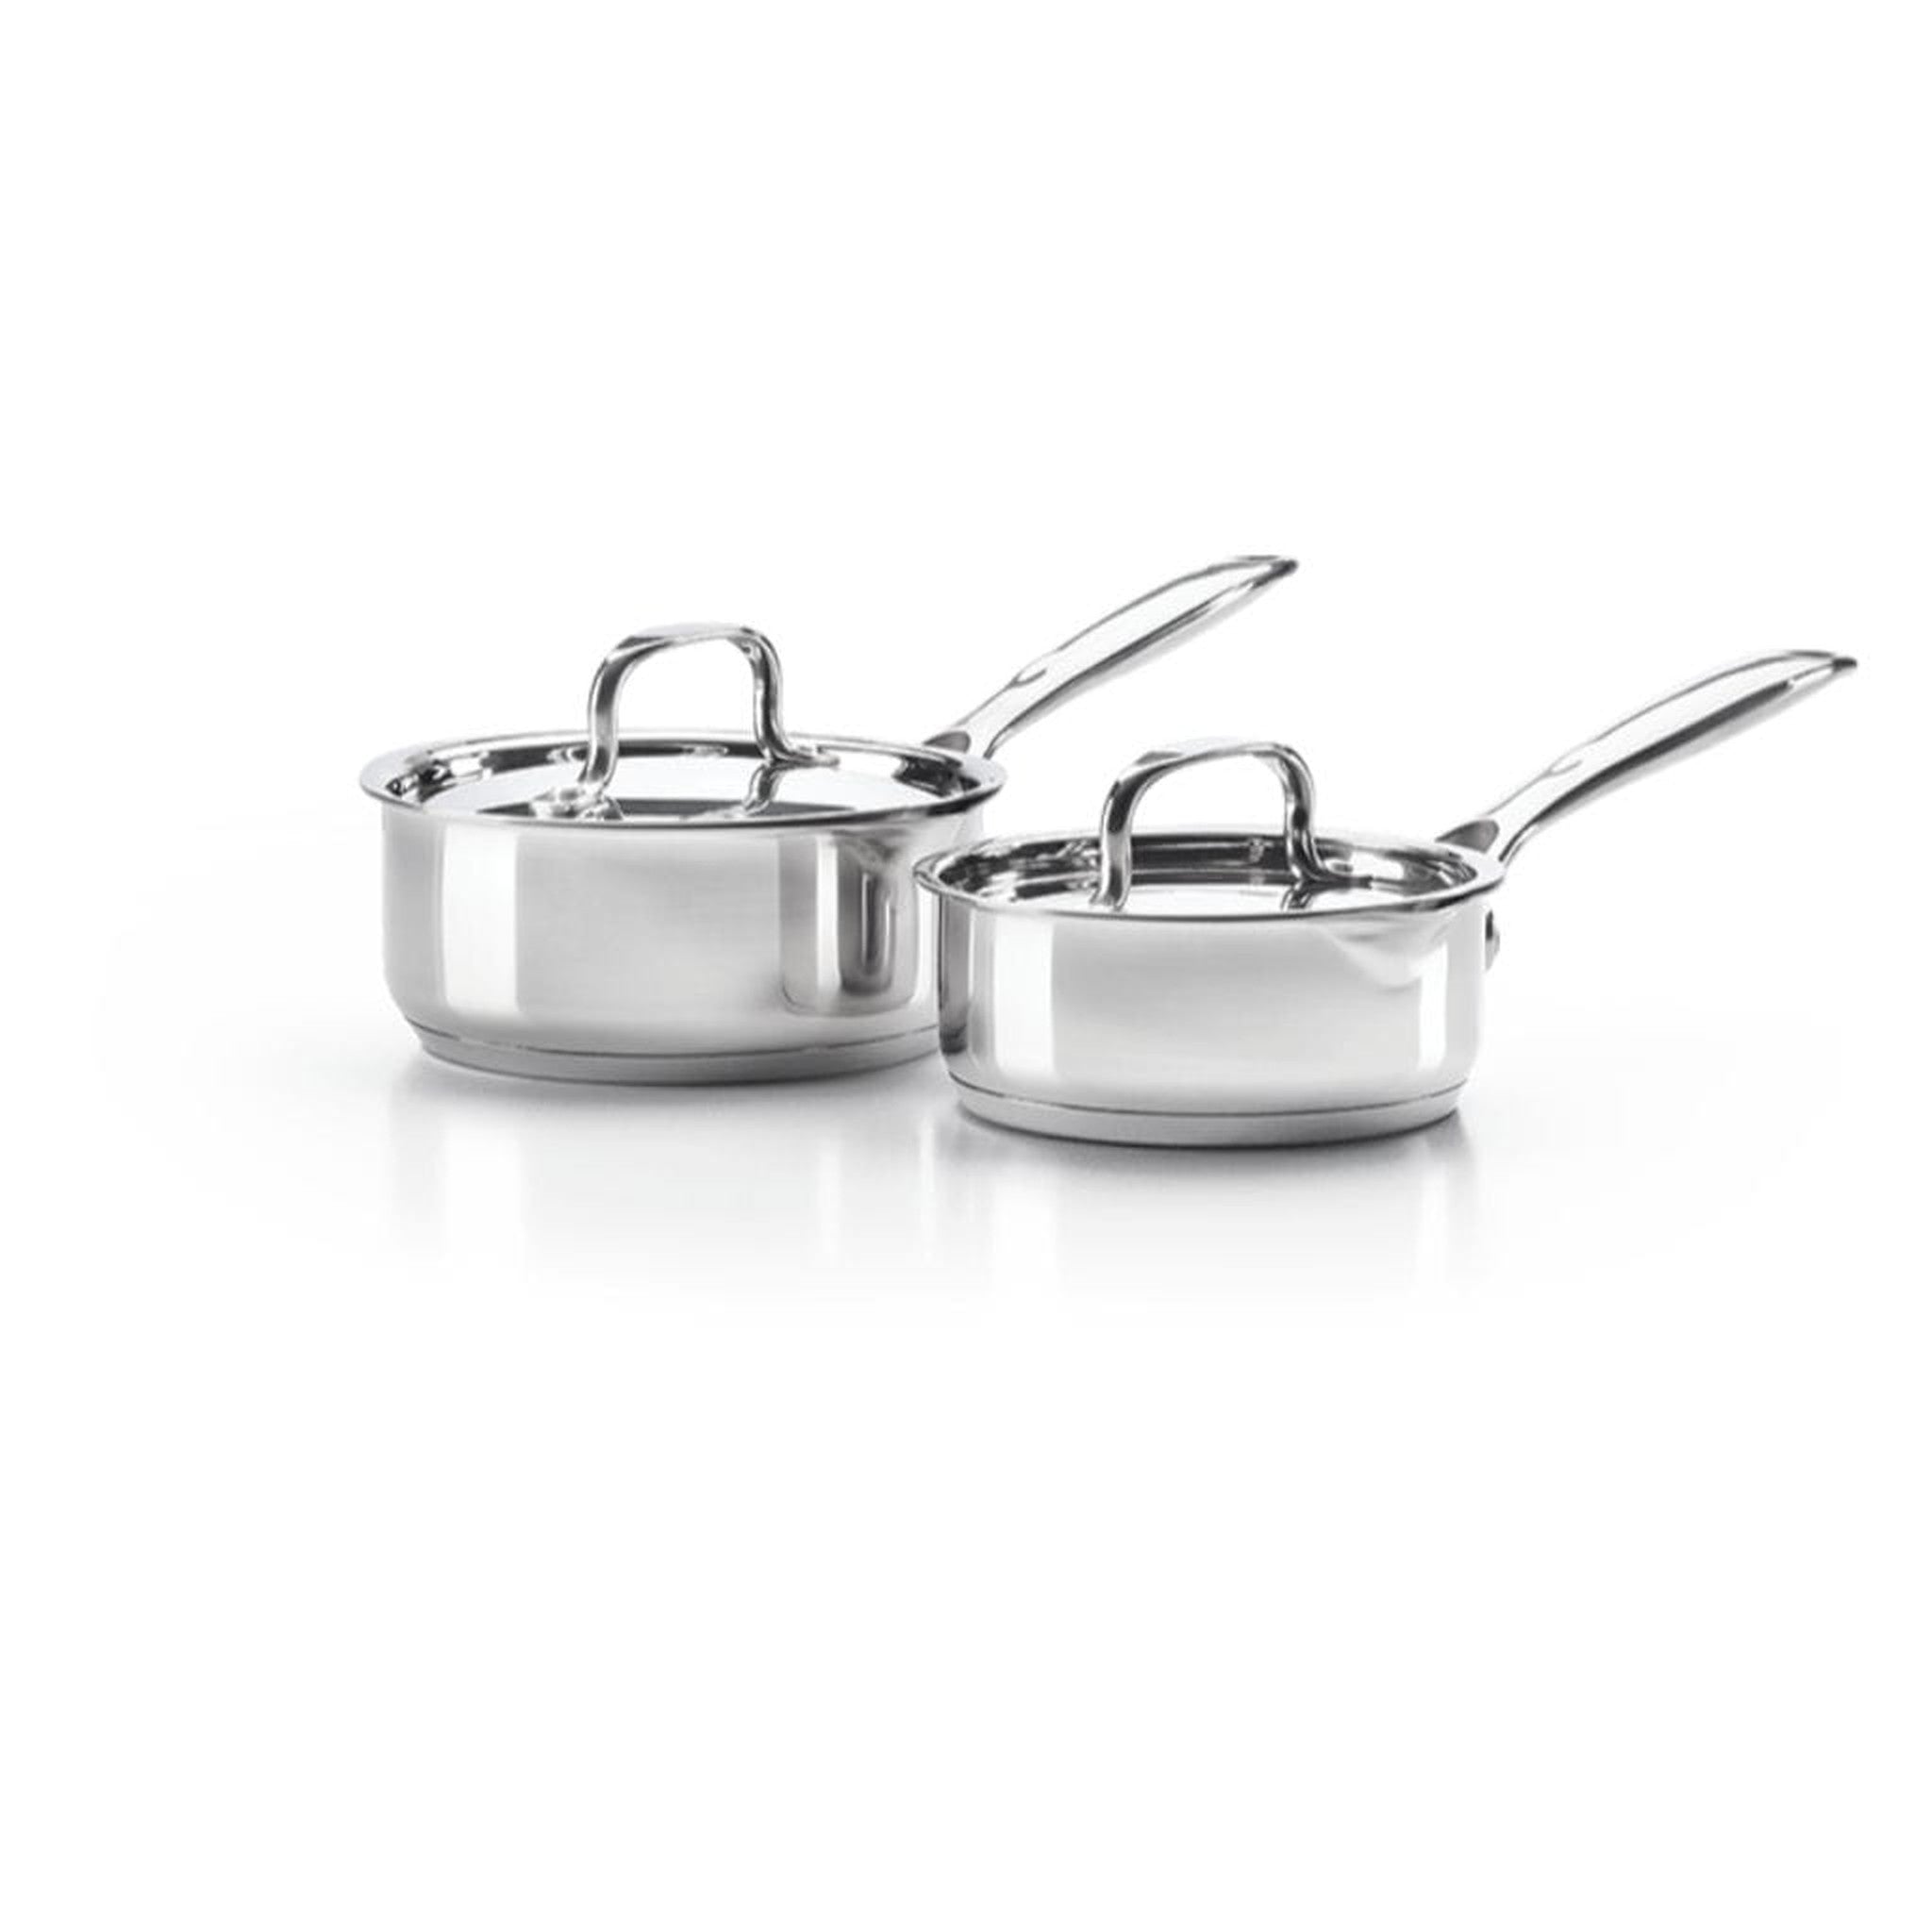 NAPOLEON Stainless Steel 2-Piece Sauce Pan Set – Grill Collection